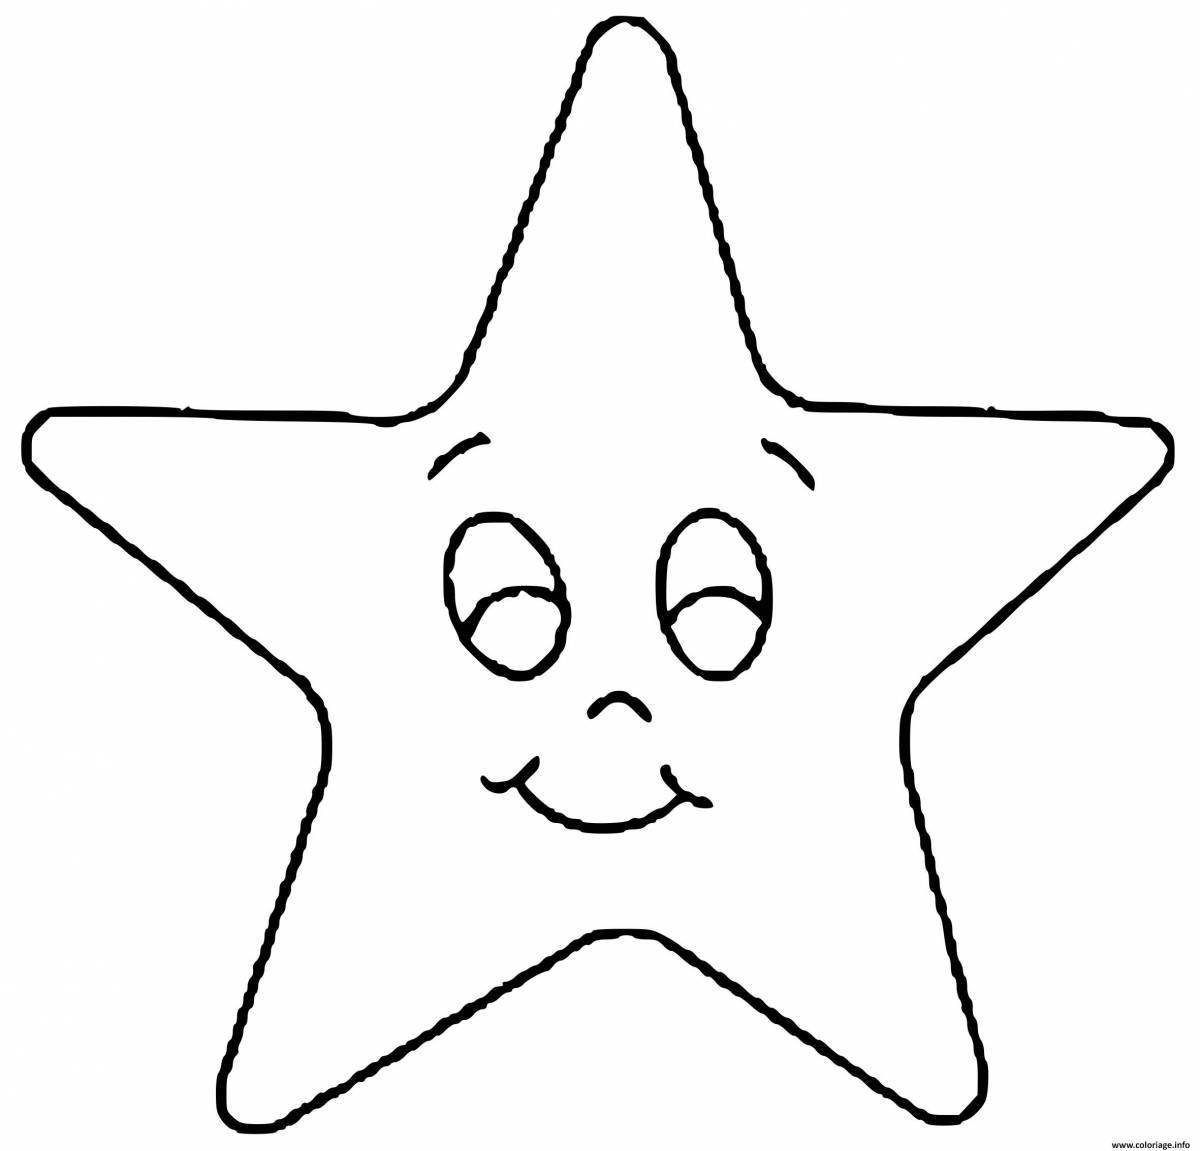 Jolly star coloring book for kids